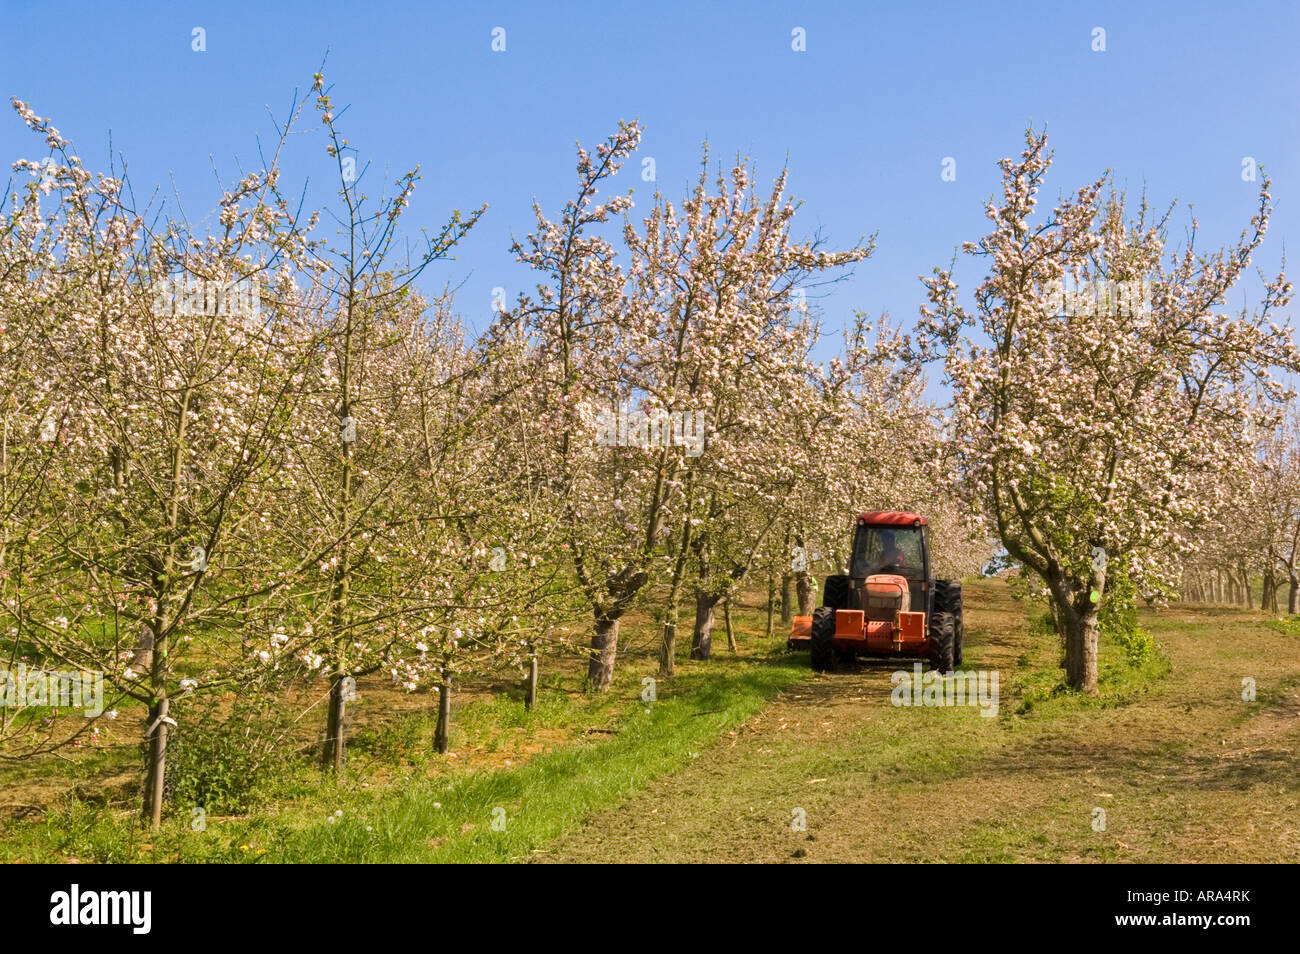 Tractor mowing grass in cider apple orchard during spring blossom Vale of Evesham Blossom Trail Worcestershire England Stock Photo